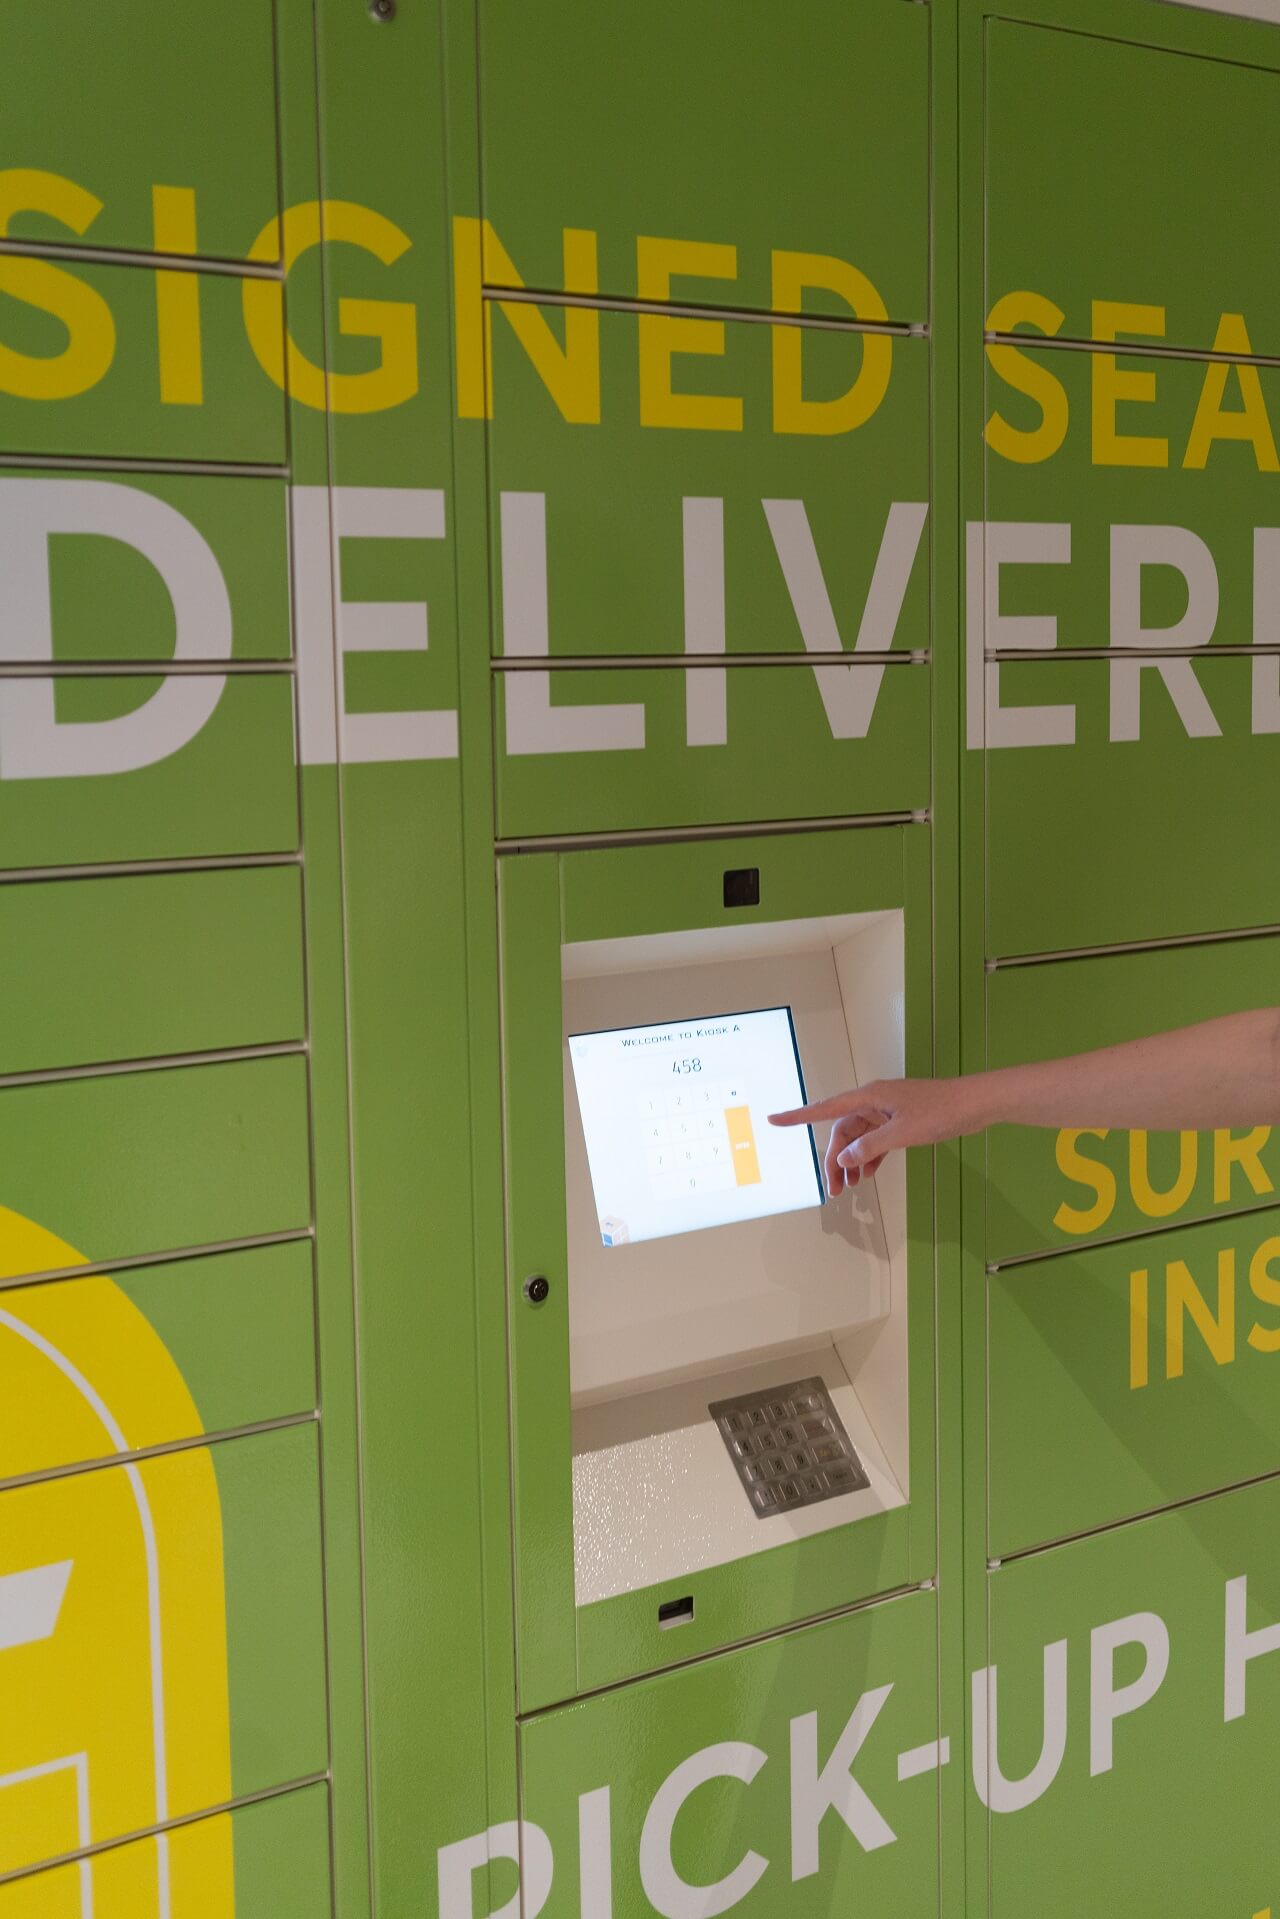 Contactless Package Lockers Thriving During Pandemic | Parcel Pending Blog